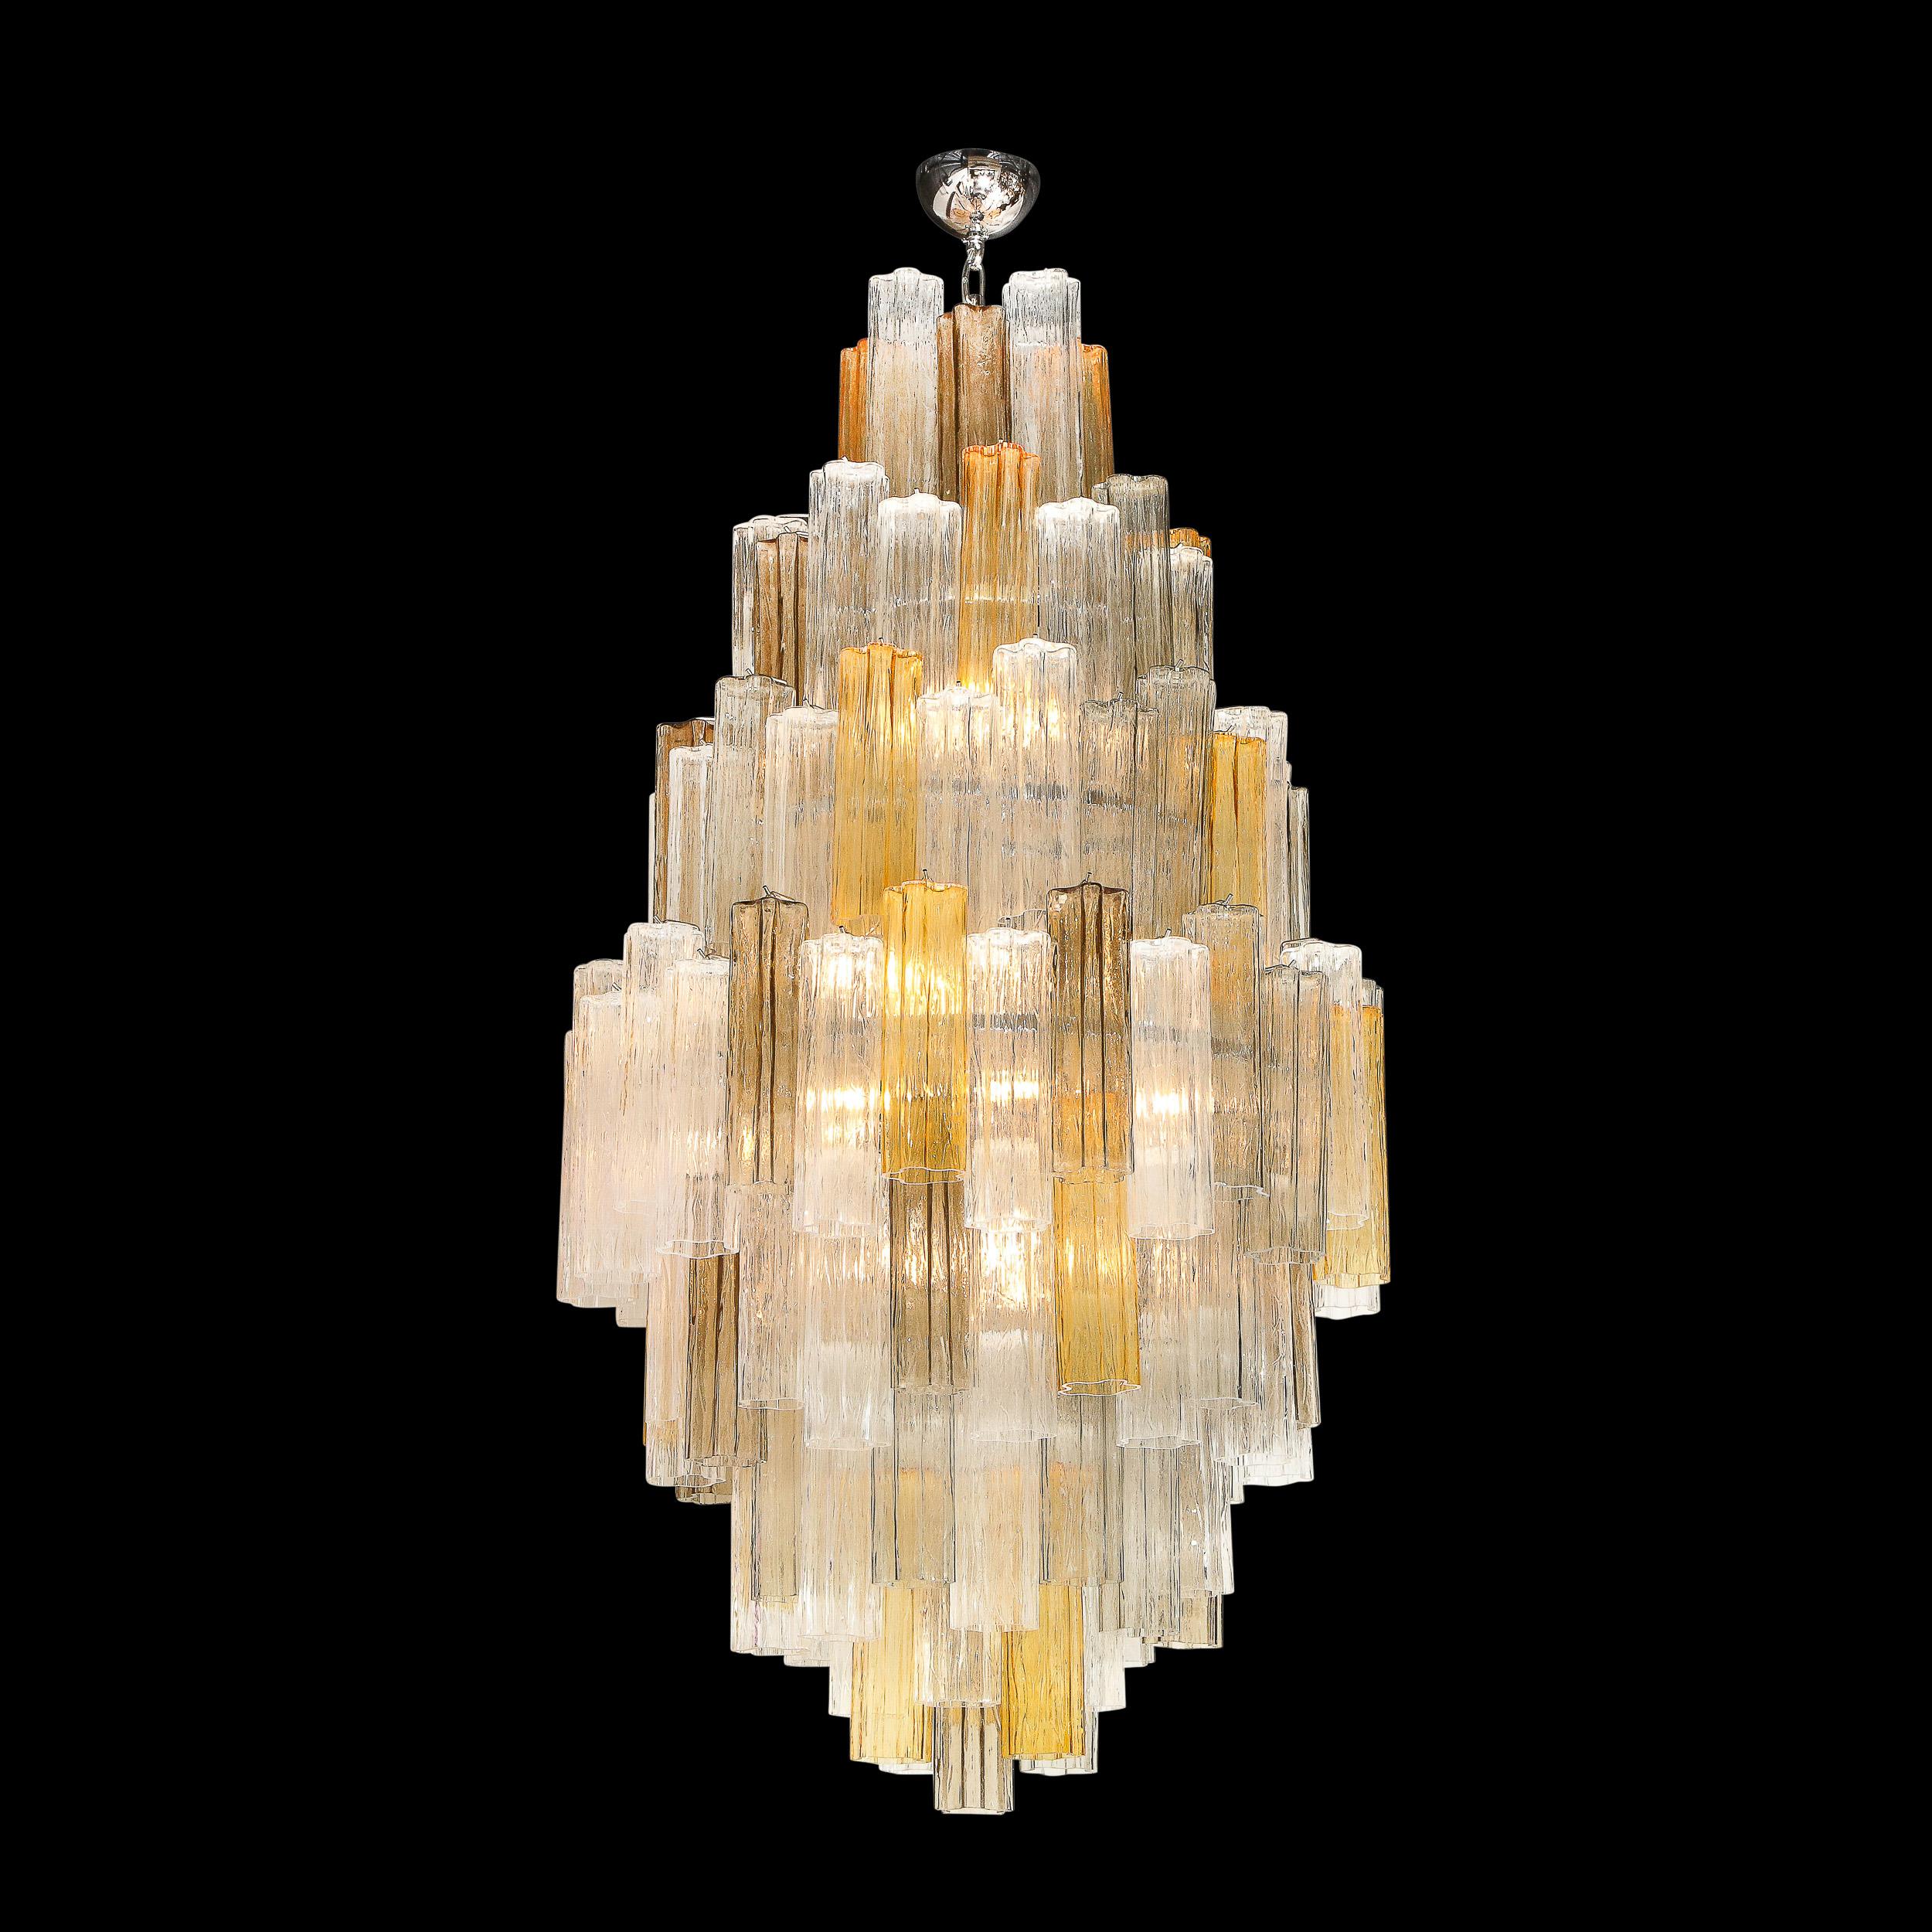 This stunning and vibrant modernist tronchi chandelier was handblown in Murano, Italy- the island off the coast of Venice renowned for centuries for its superlative glass production. It features an abundance of tronchi crystals in a Clear and Amber